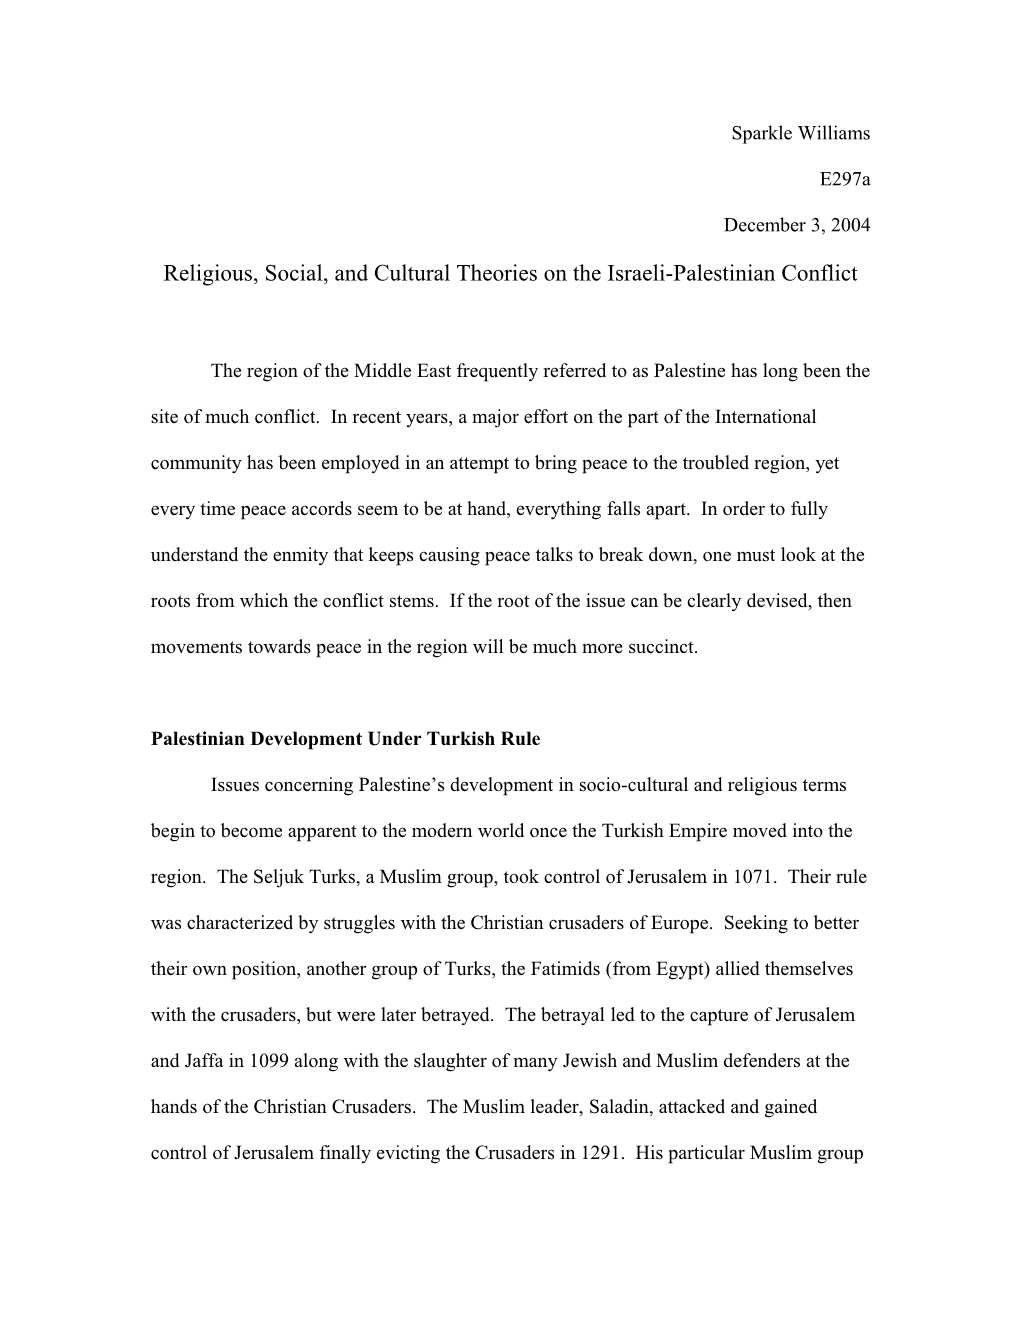 Religious, Social, and Cultural Theories on the Israeli-Palestinian Conflict